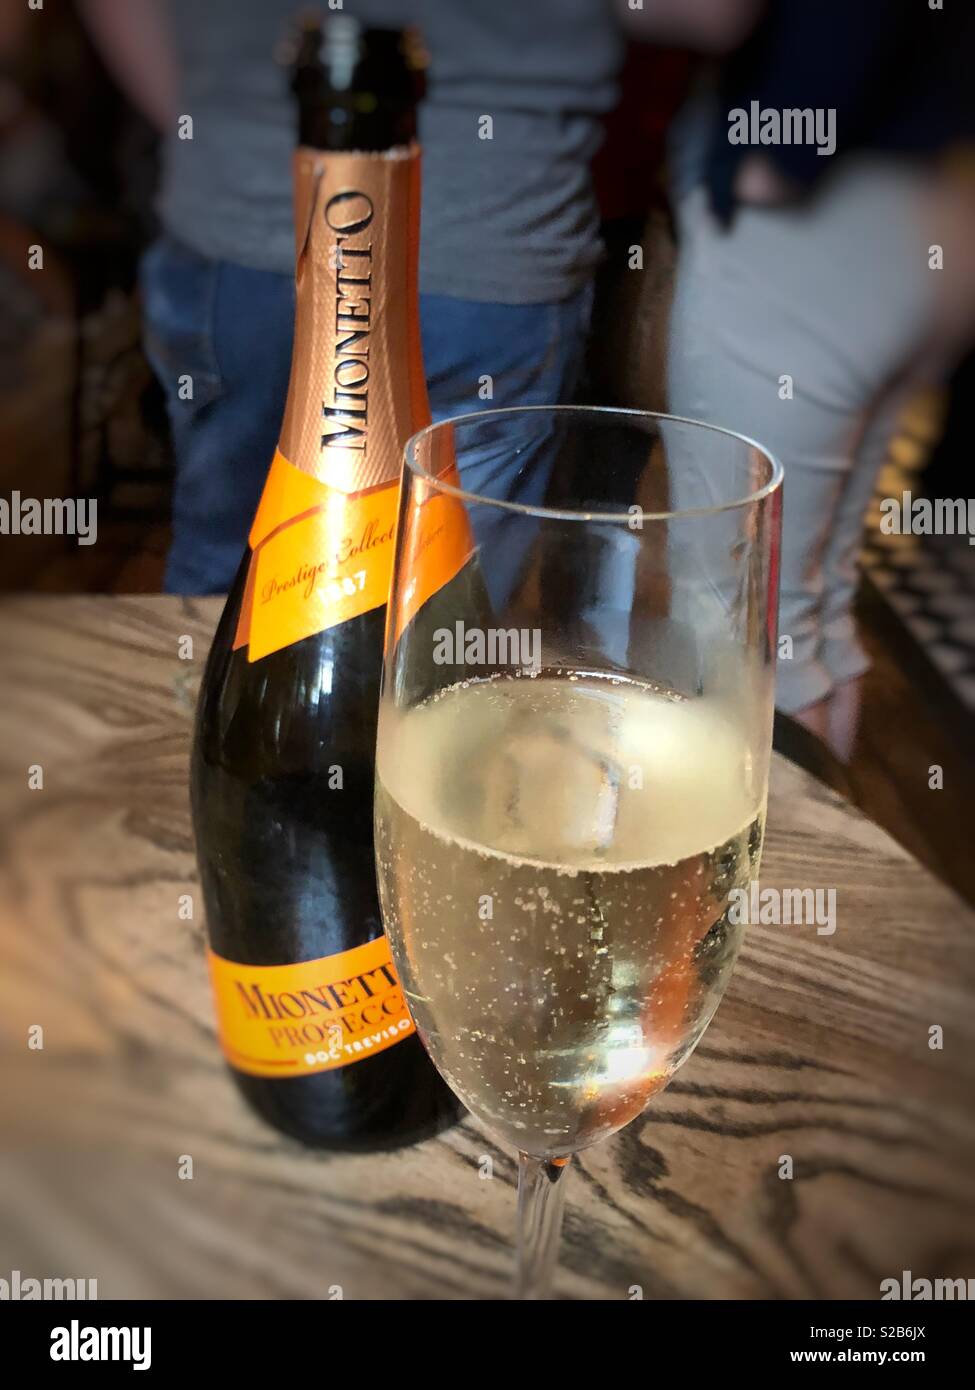 A Bottle of prosecco with a half full glass next to it in a pub with a man and a woman blurred in the background Stock Photo